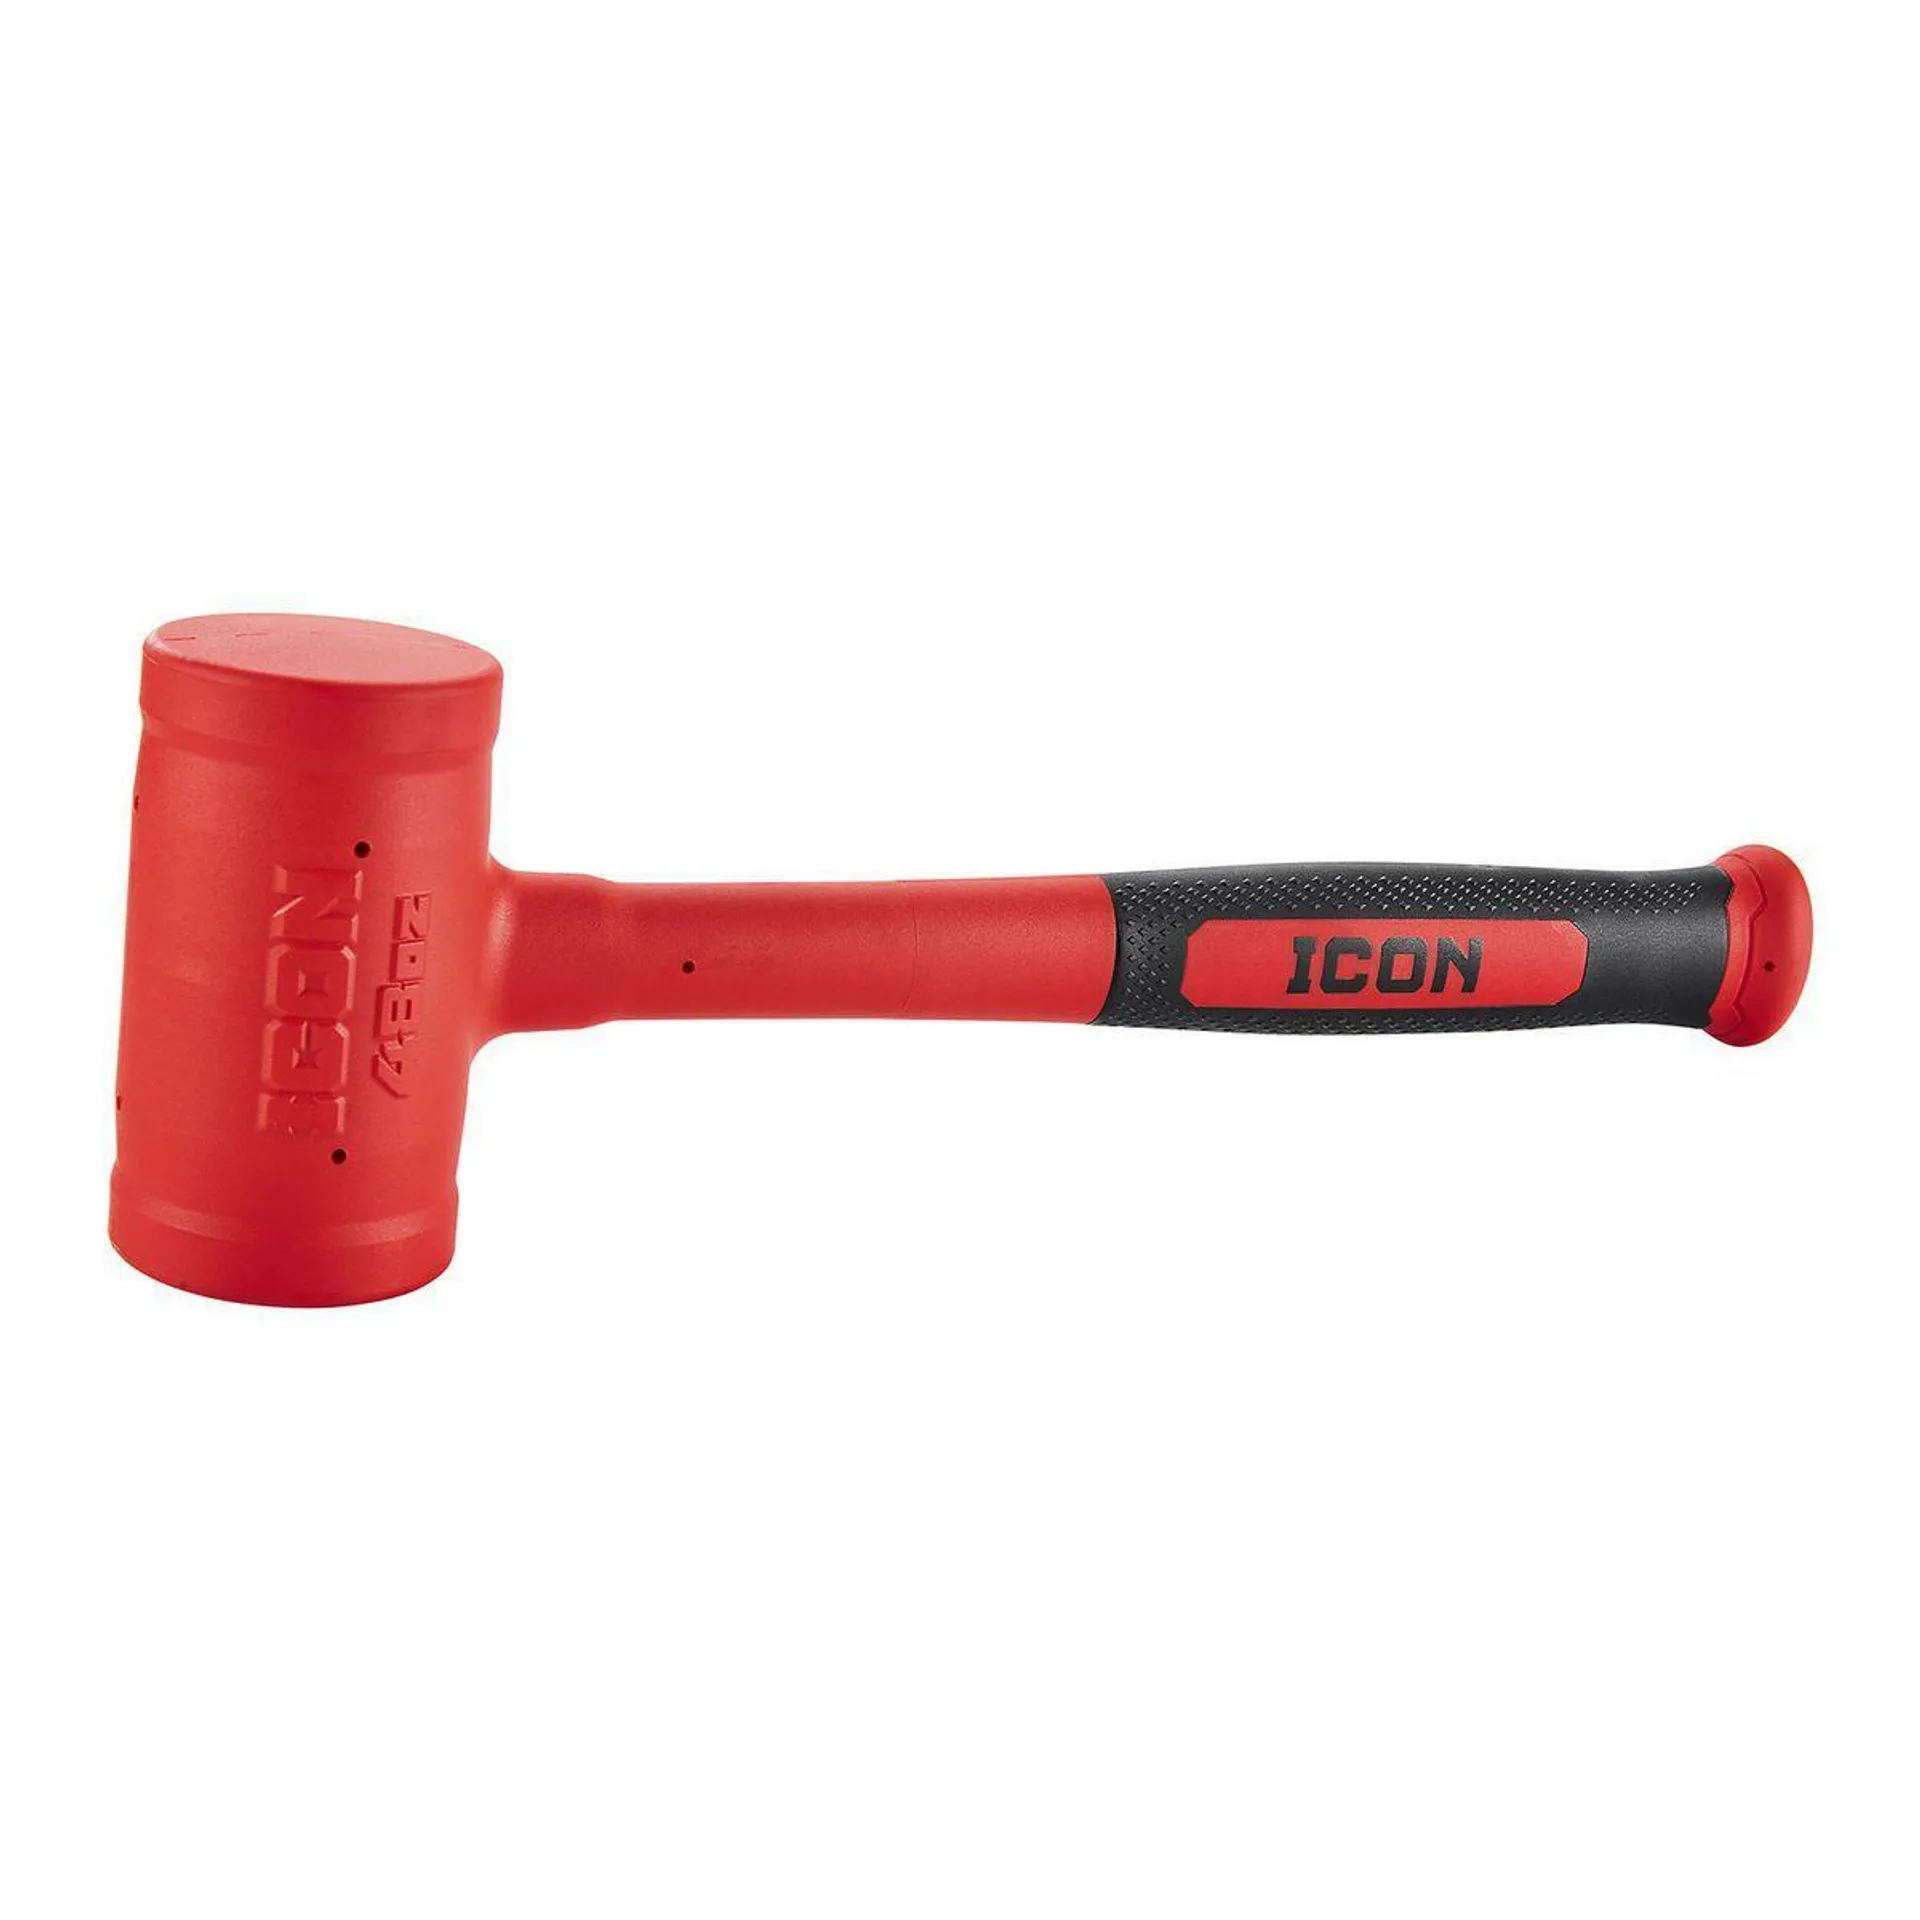 ICON 48 oz. Soft Face Dead Blow Hammer